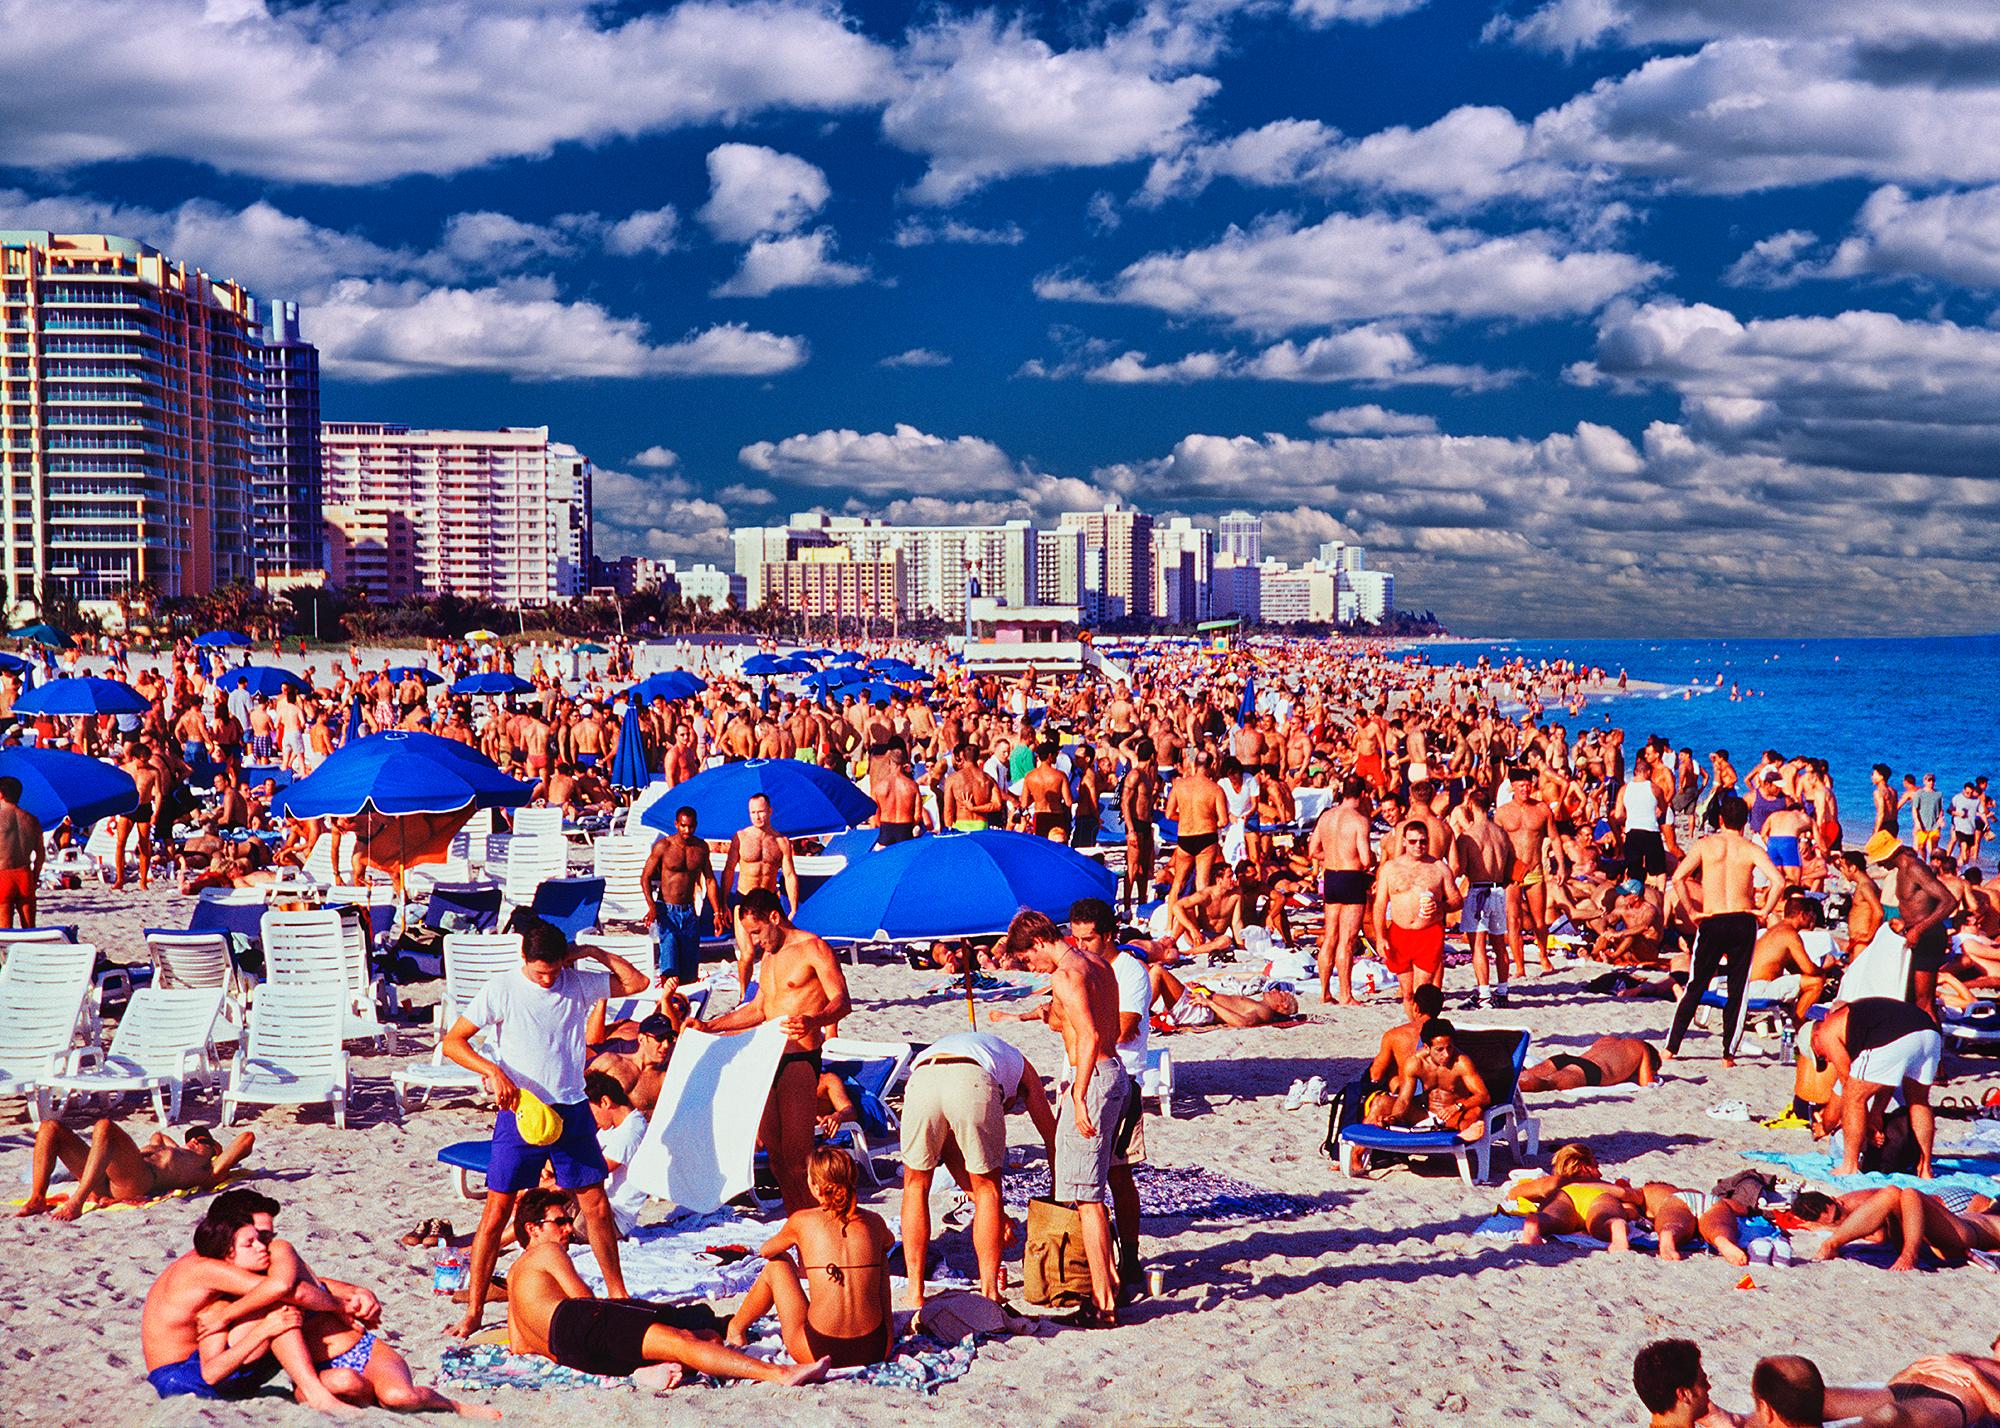 Mitchell Funk Landscape Photograph - Gay Beach,  A Heavenly Place on Miami Beach  Men in Bathing Suits. Gay Interest 